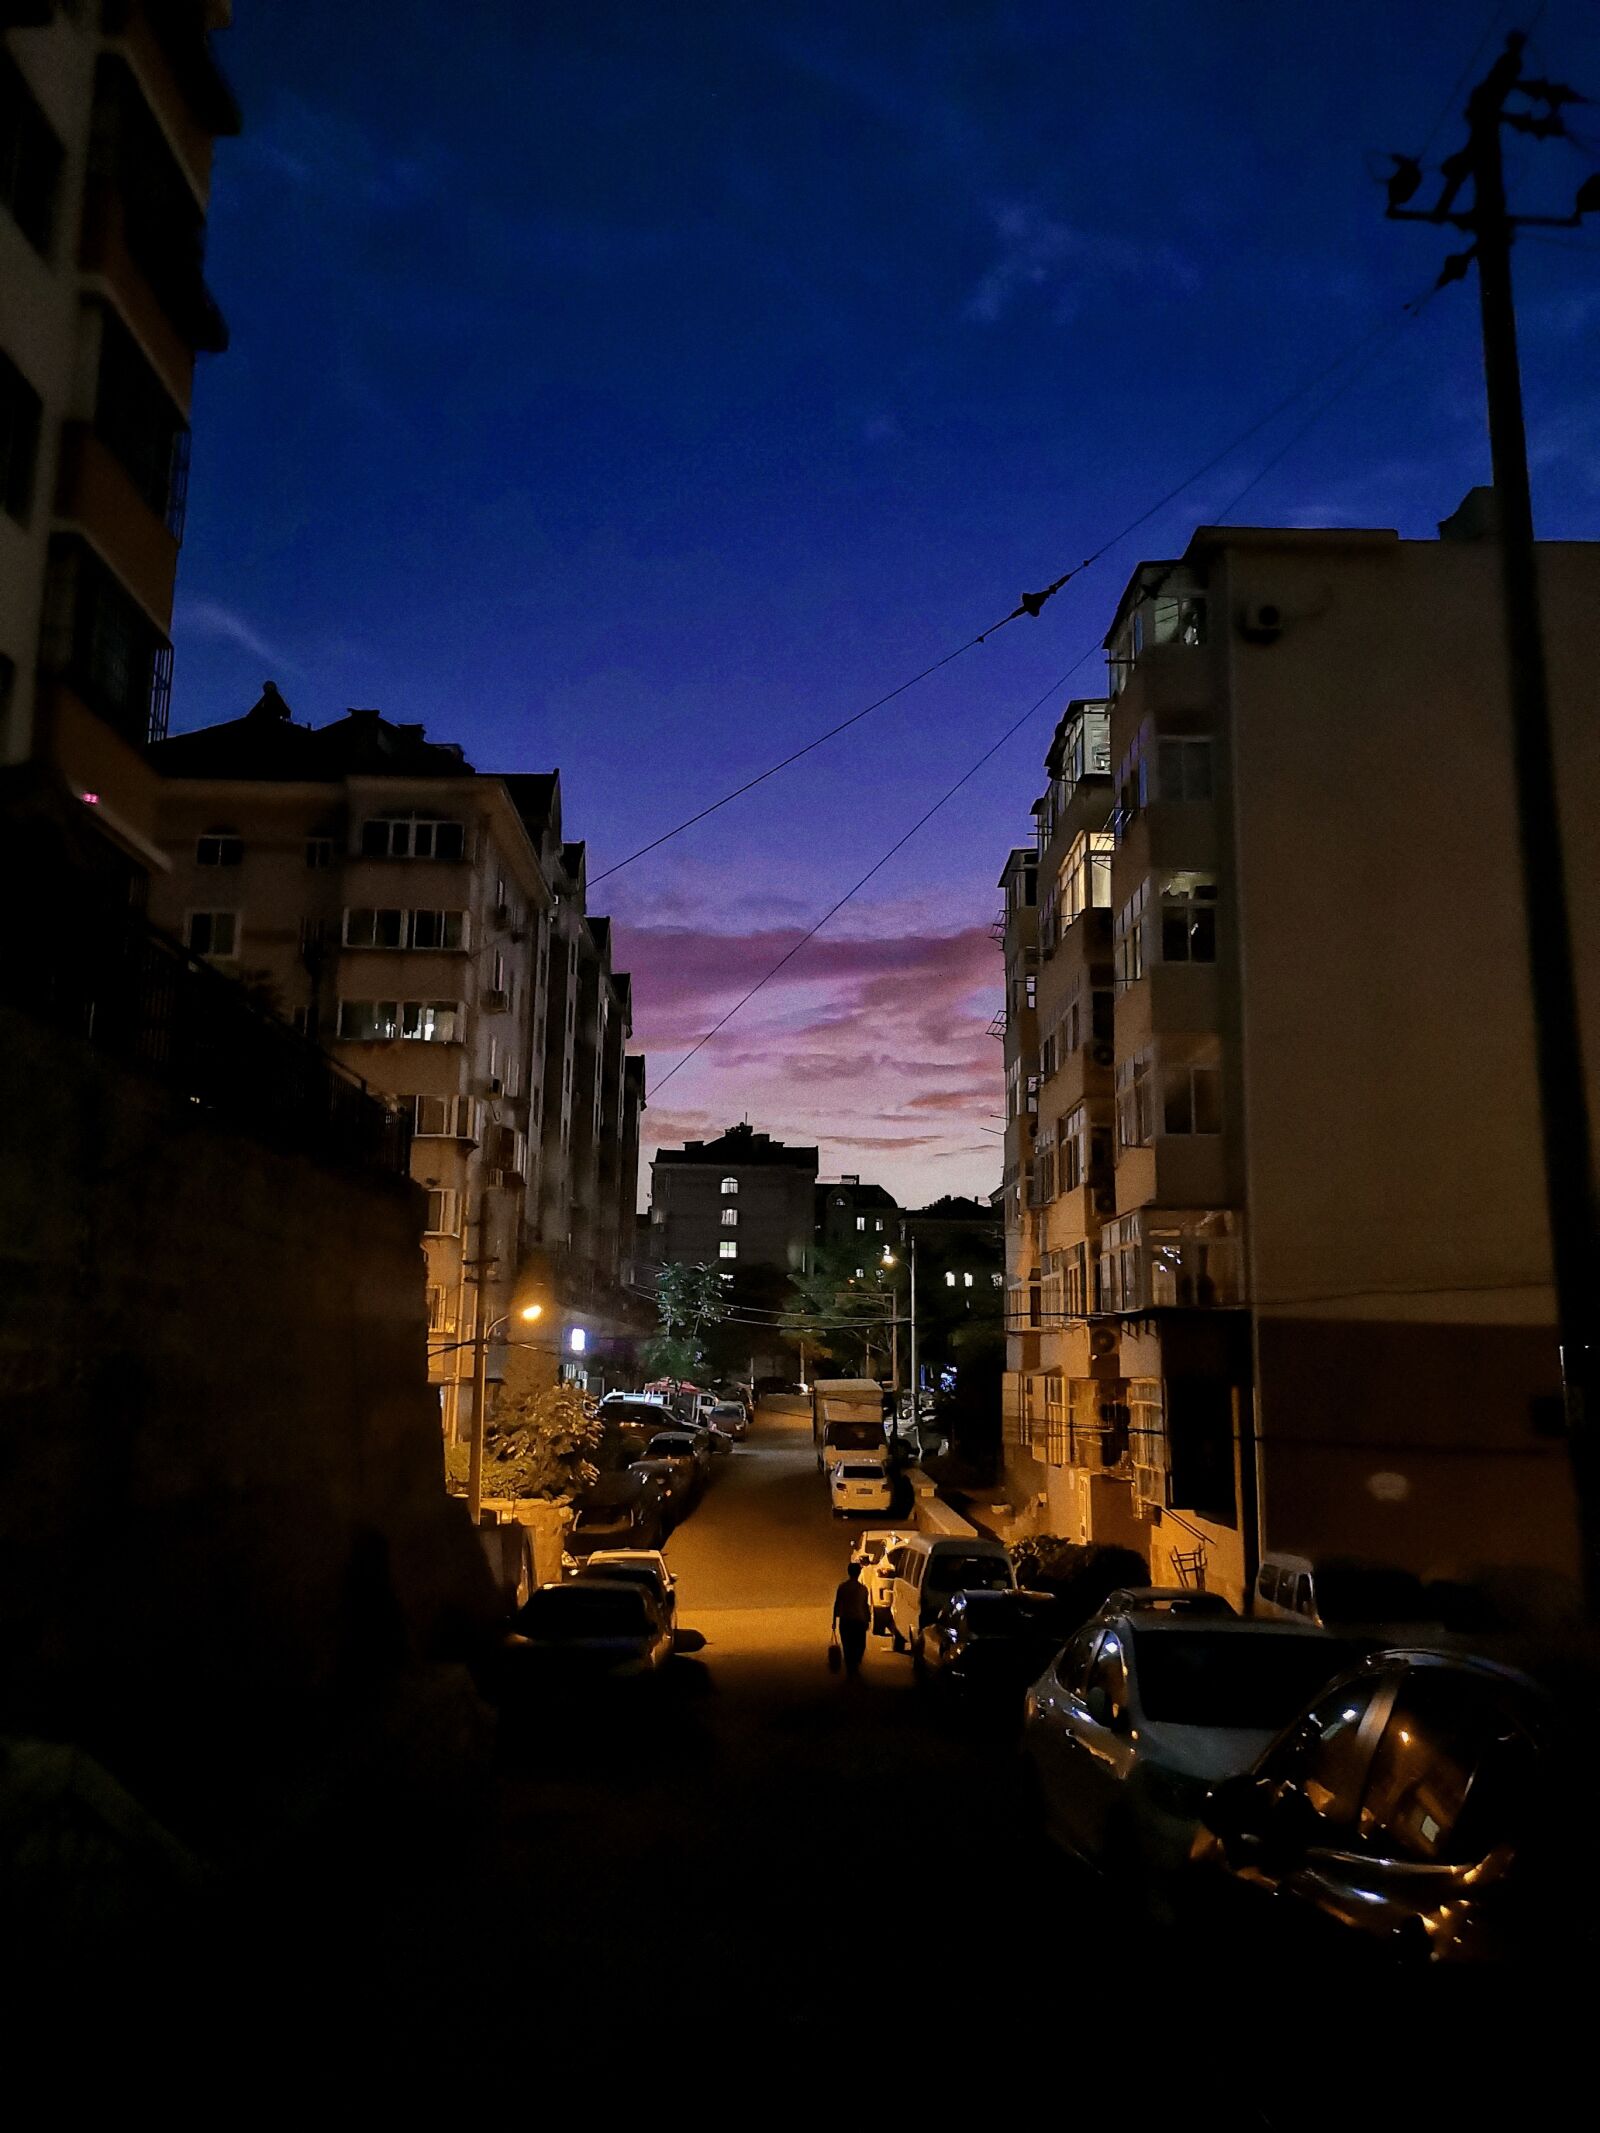 HUAWEI P20 Pro sample photo. Sunset, owned people, night photography